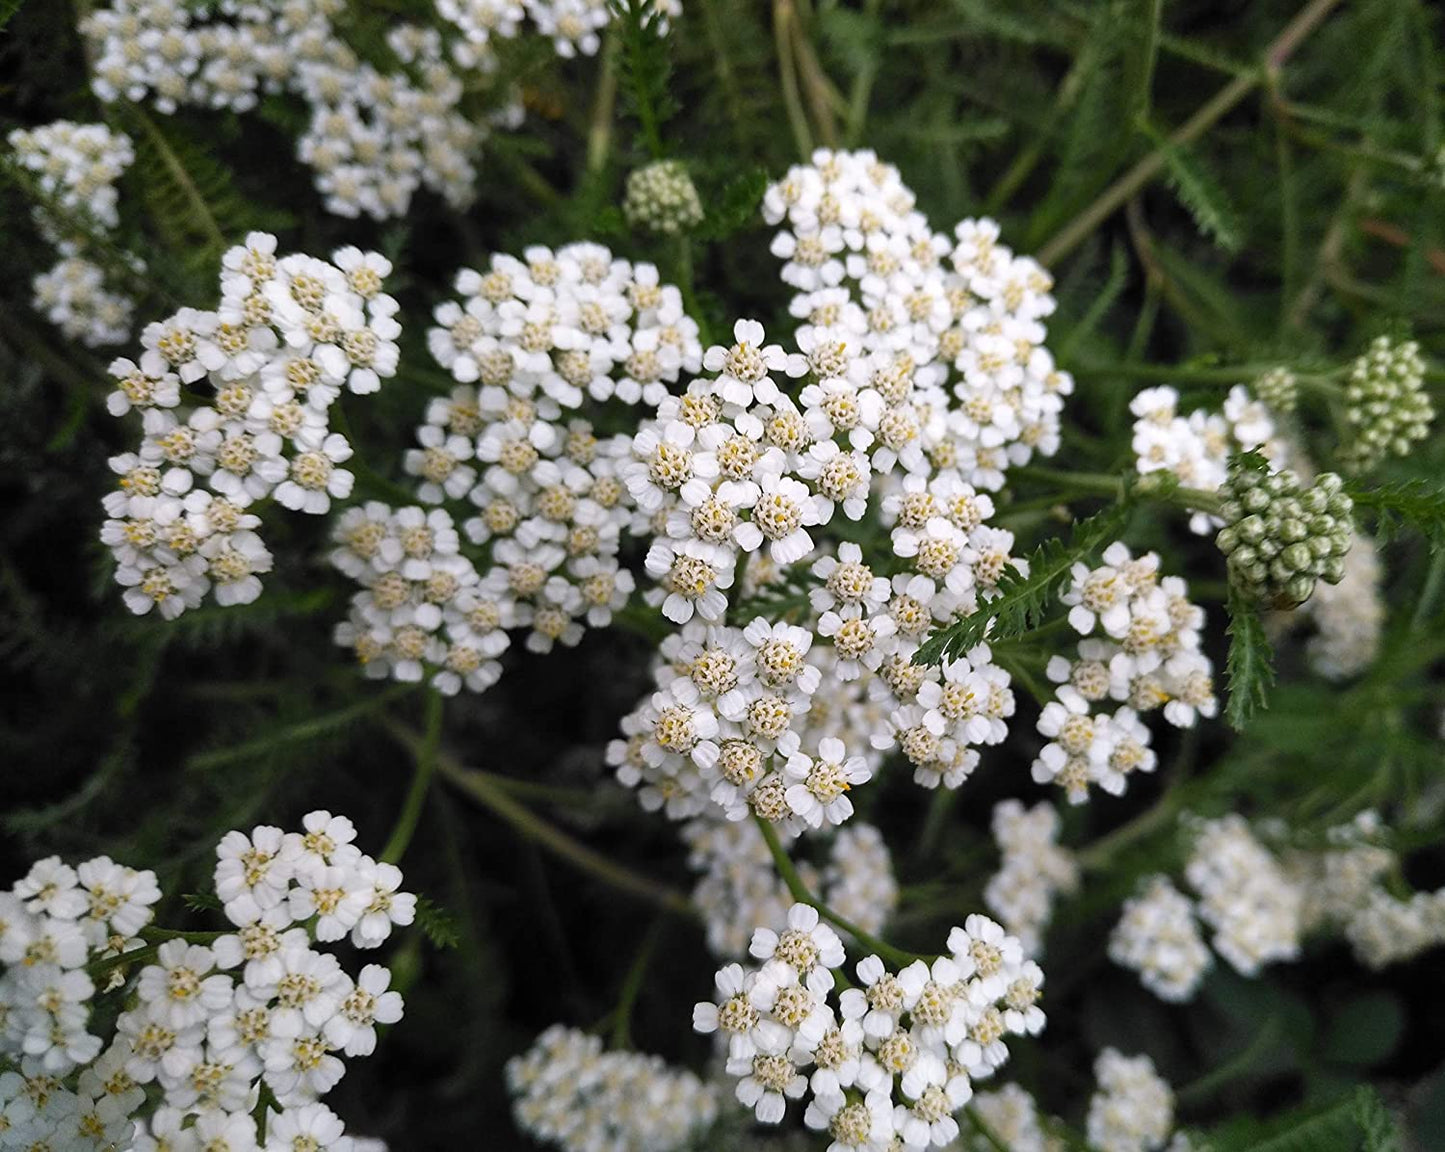 Hundredfold White Common Yarrow Herb 1000 Seeds - Achillea millefolium for Butterflies and Bees, Excellent for Lawn and Turf